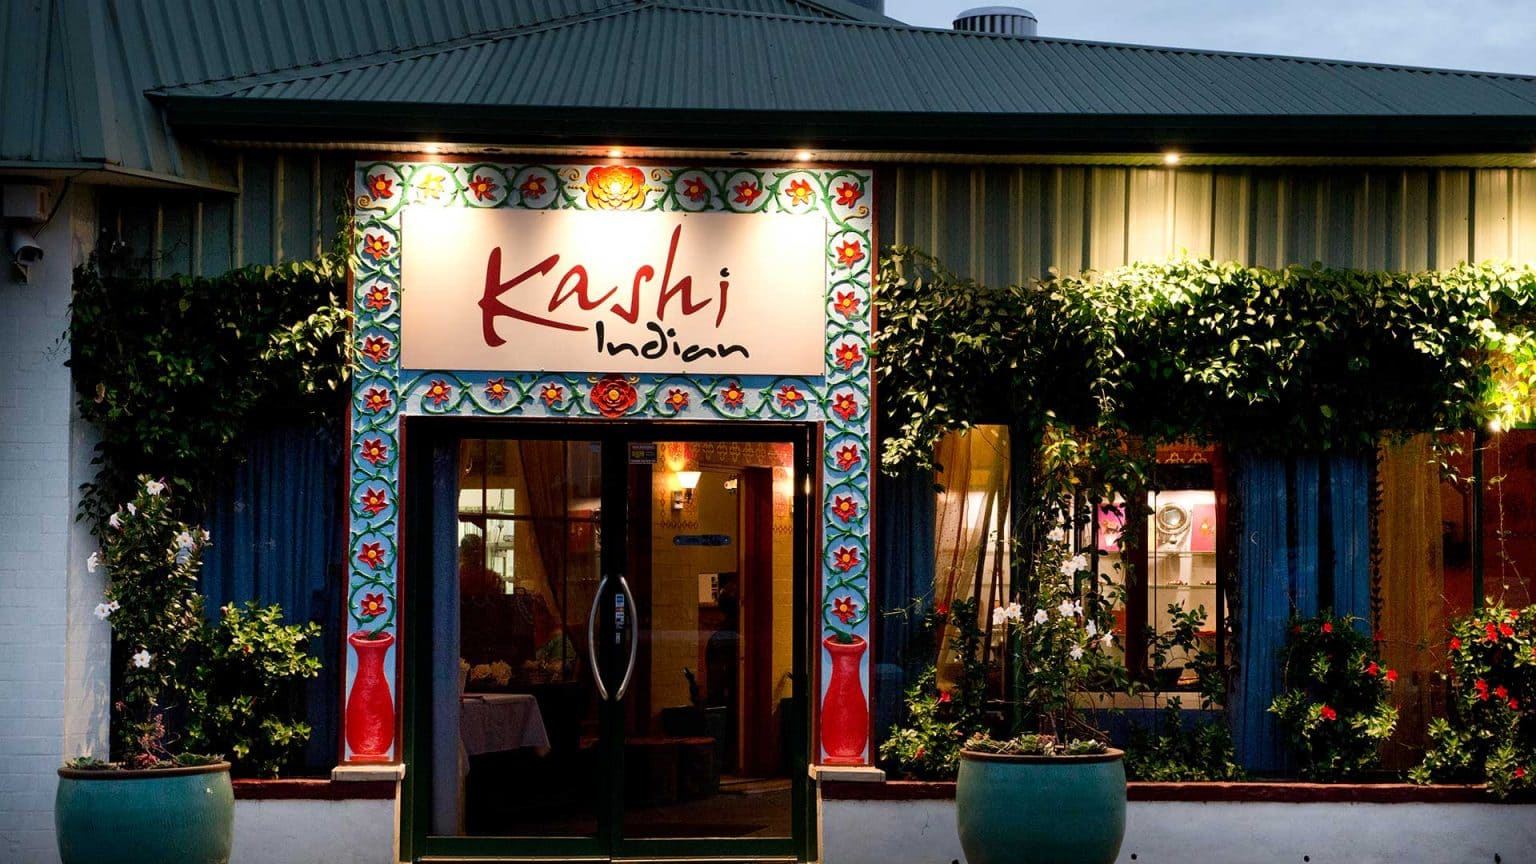 Kashi Indian Restaurant | Traditional Indian Cuisine | Indian Food | Cooking Classes